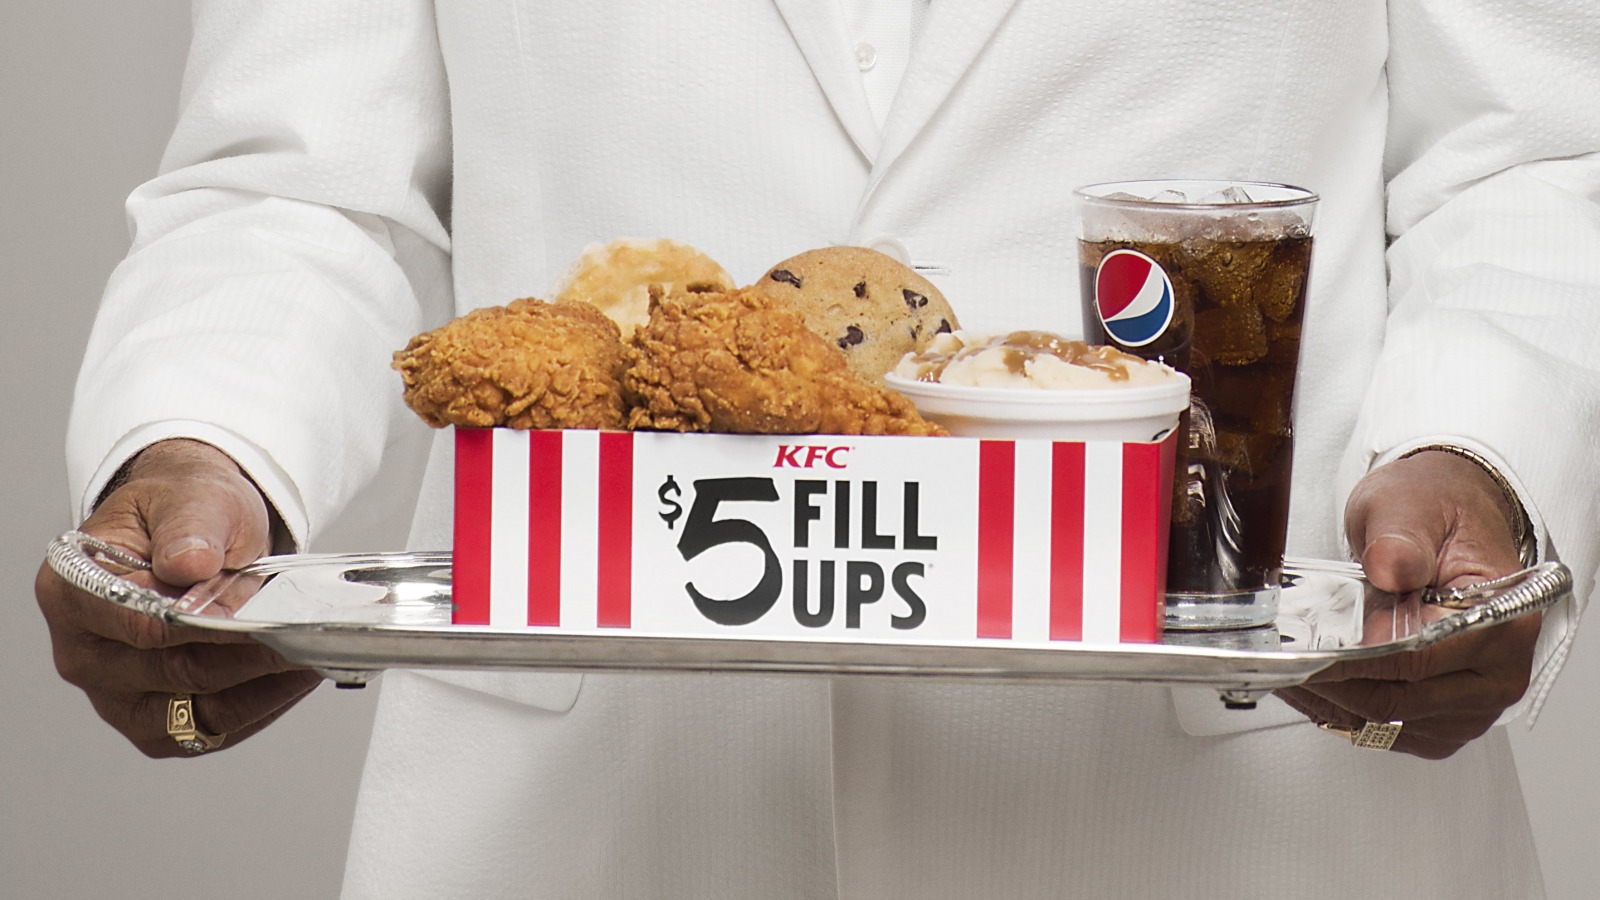 The Truth About KFC's 5 Fill Up